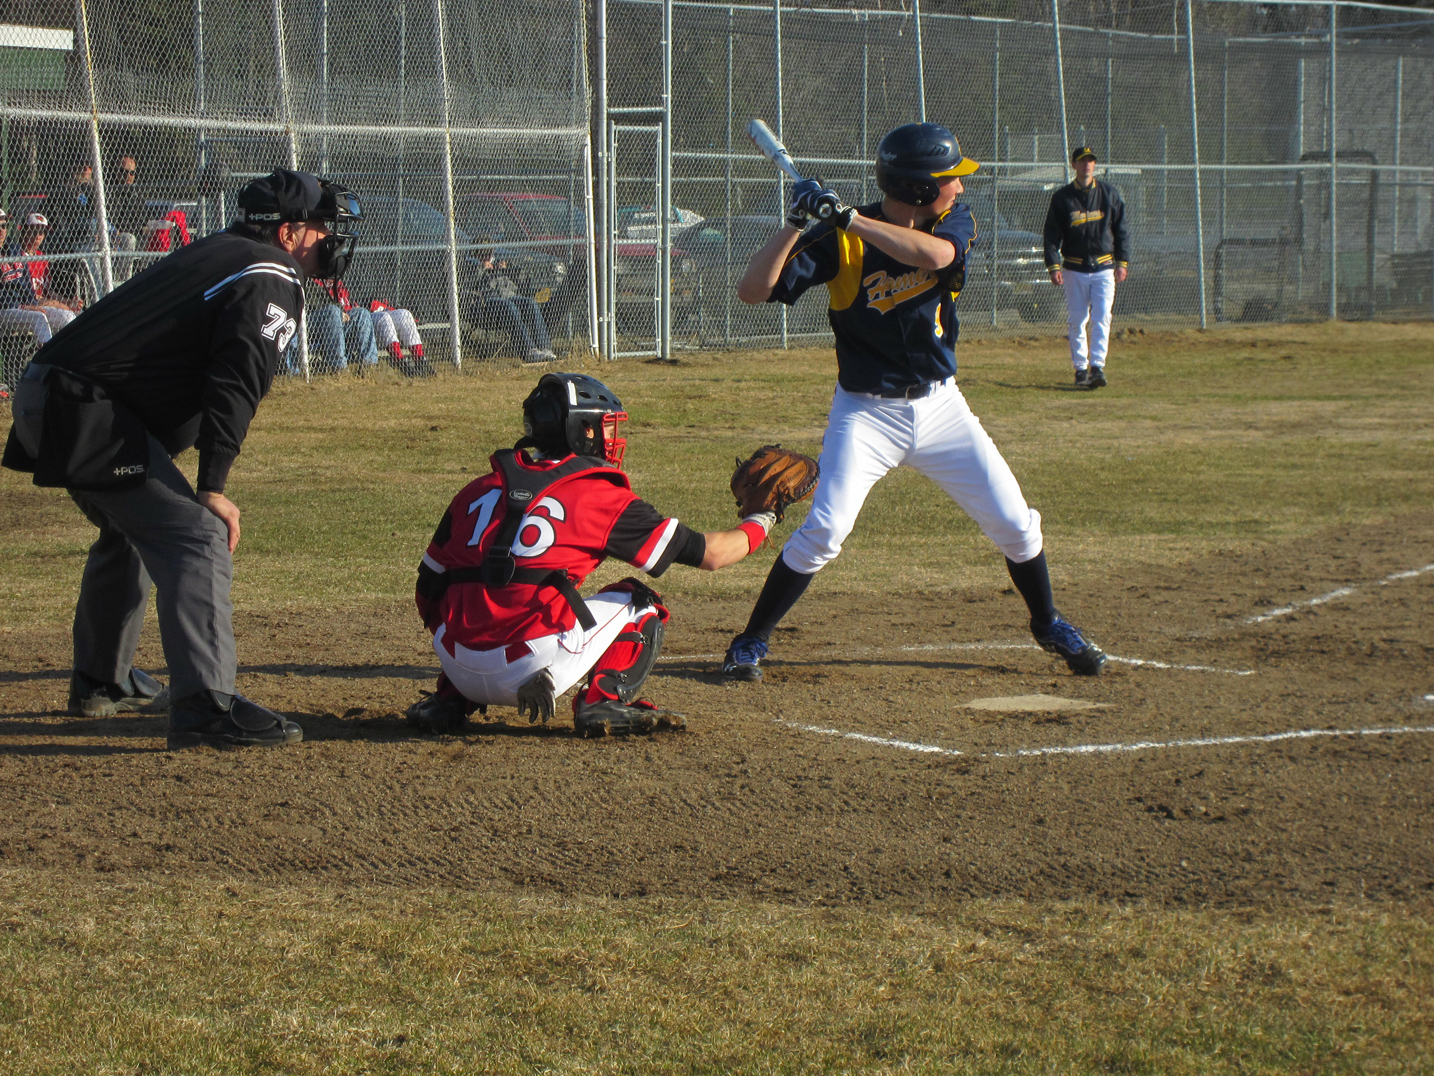 Brian Rowe leads off the Mariners’ season opener with a hit in a game against the Kenai Kardinals May 8.-Photo by Wendy Wayne